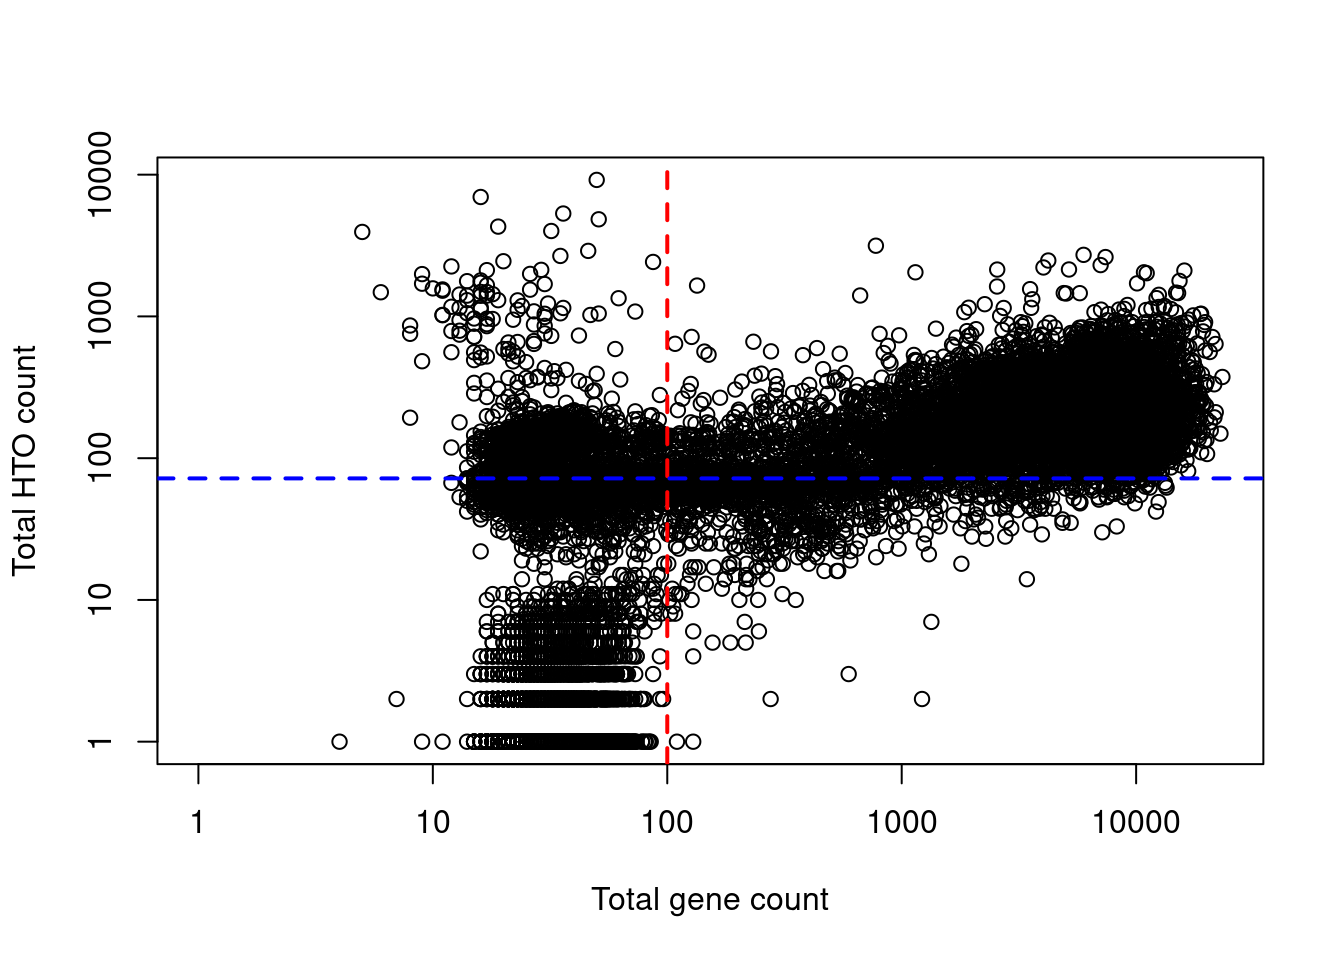 Total HTO counts plotted against the total gene counts for each library in the cell line mixture dataset. Each point represents a library while the dotted lines represent the thresholds below which libraries were assumed to be empty droplets.